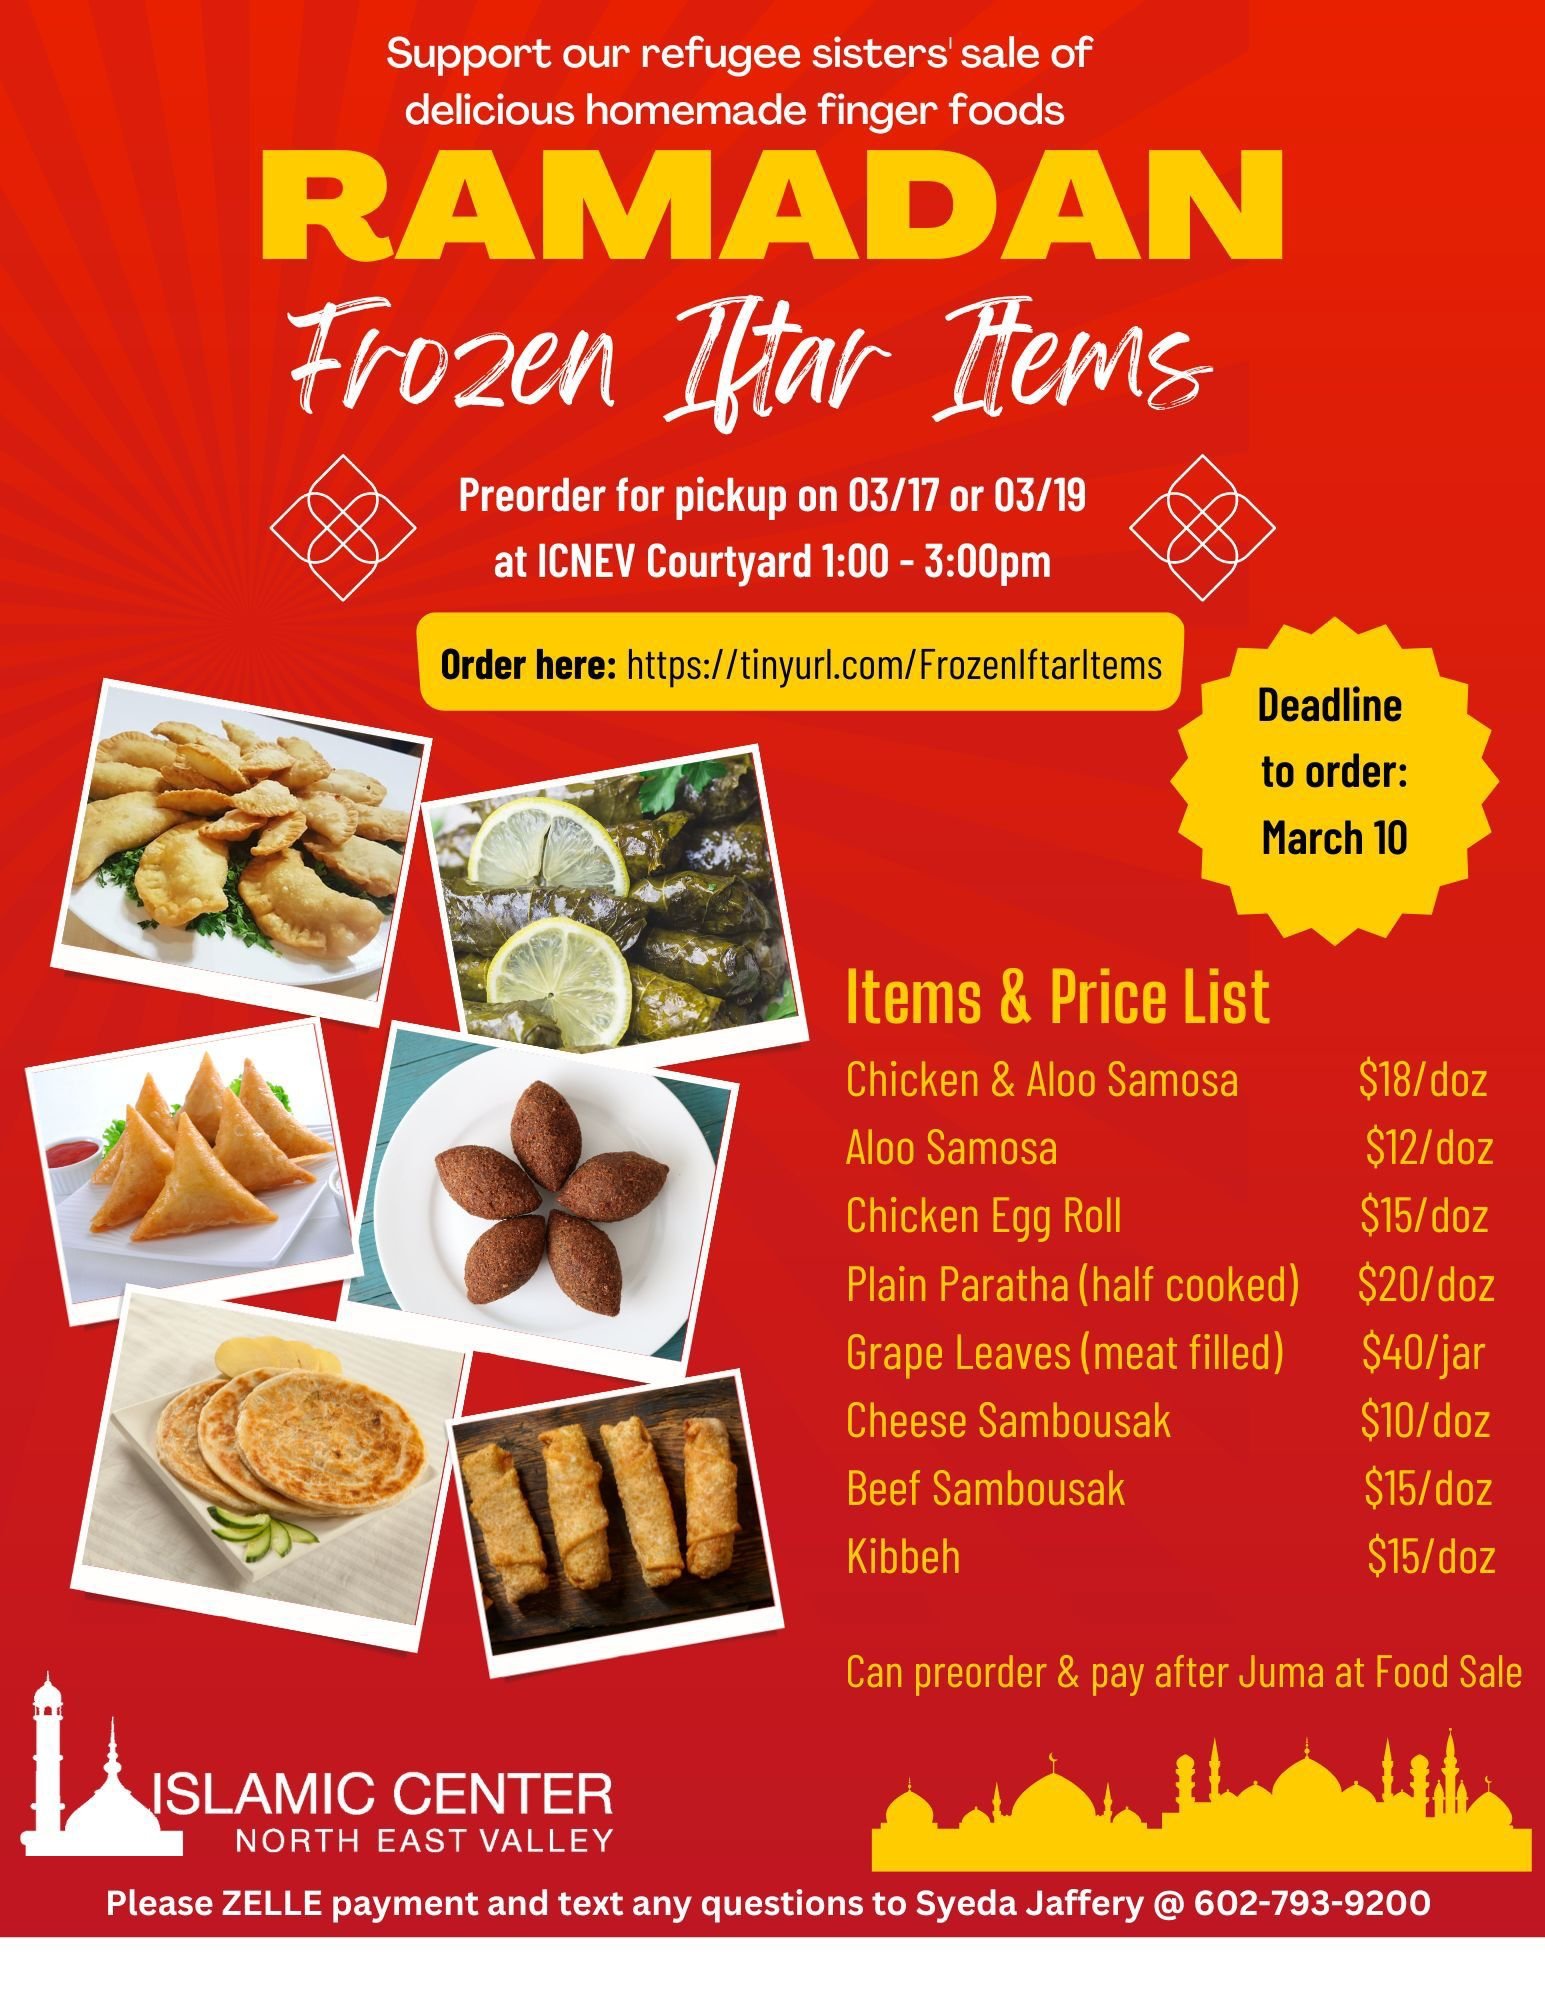 Discount on frozen food items